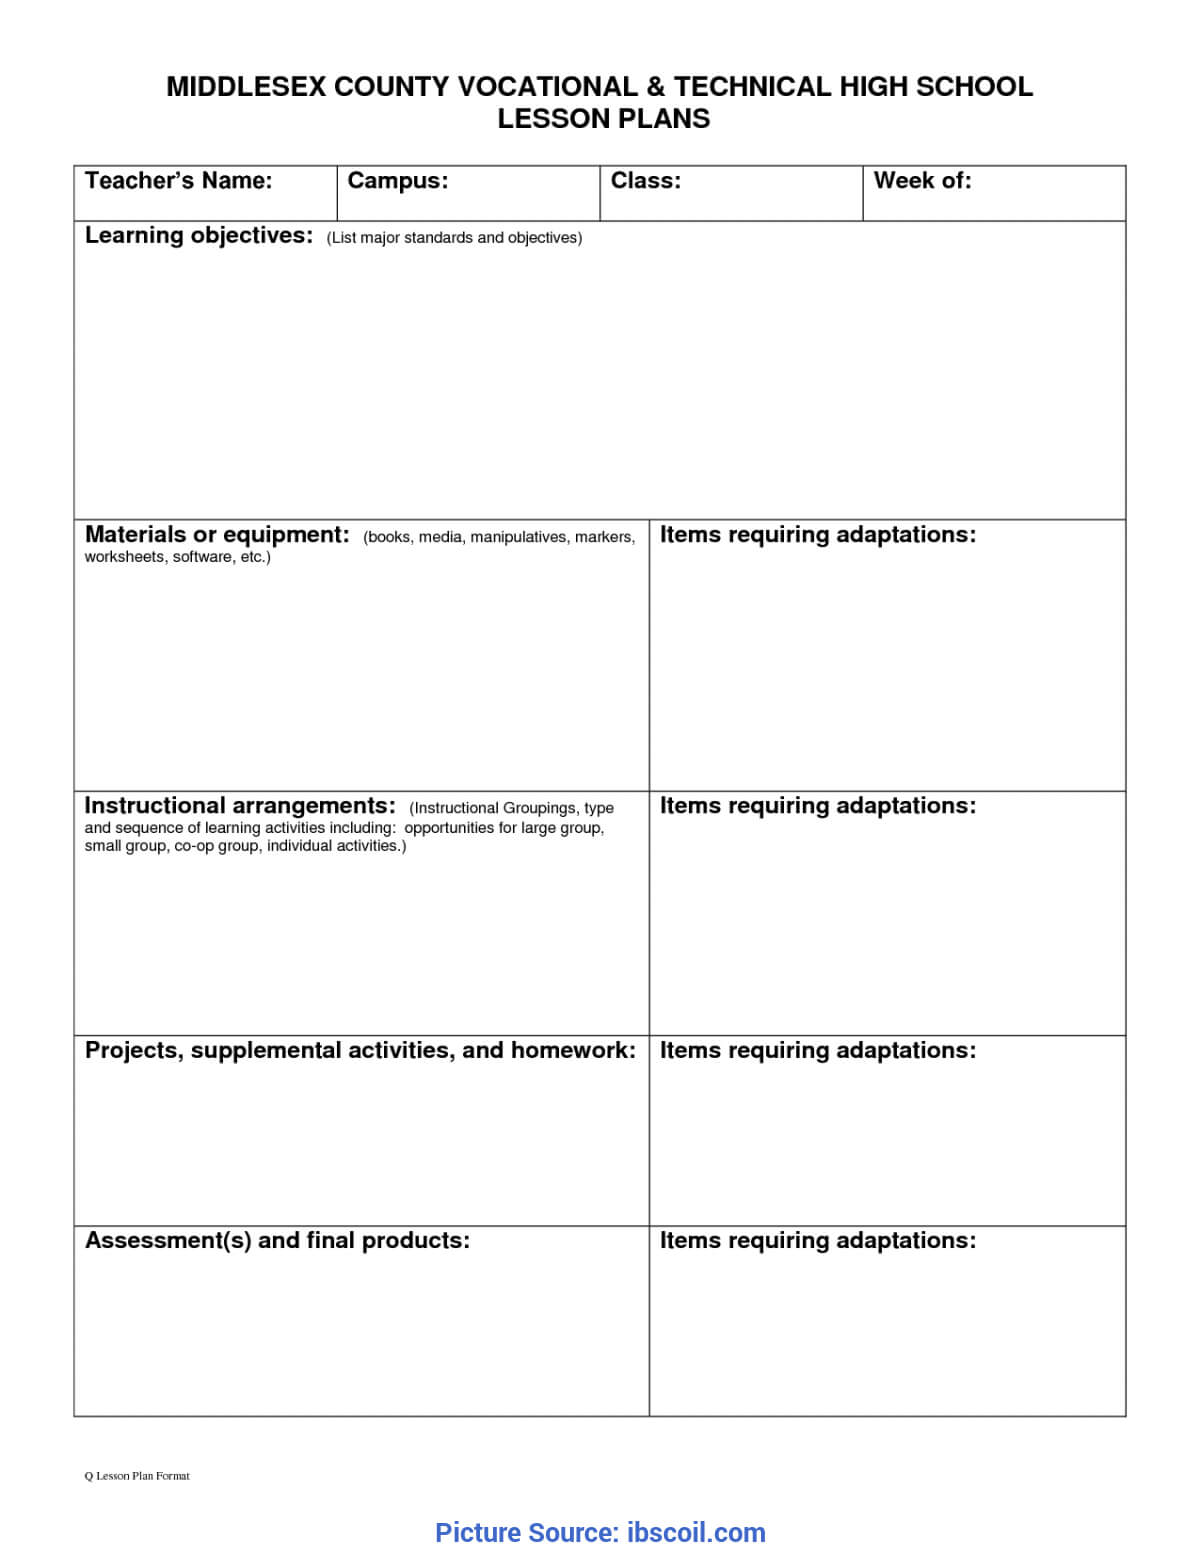 Great Lessons Learnt Template Checklist Prince2 Lessons Intended For Prince2 Lessons Learned Report Template